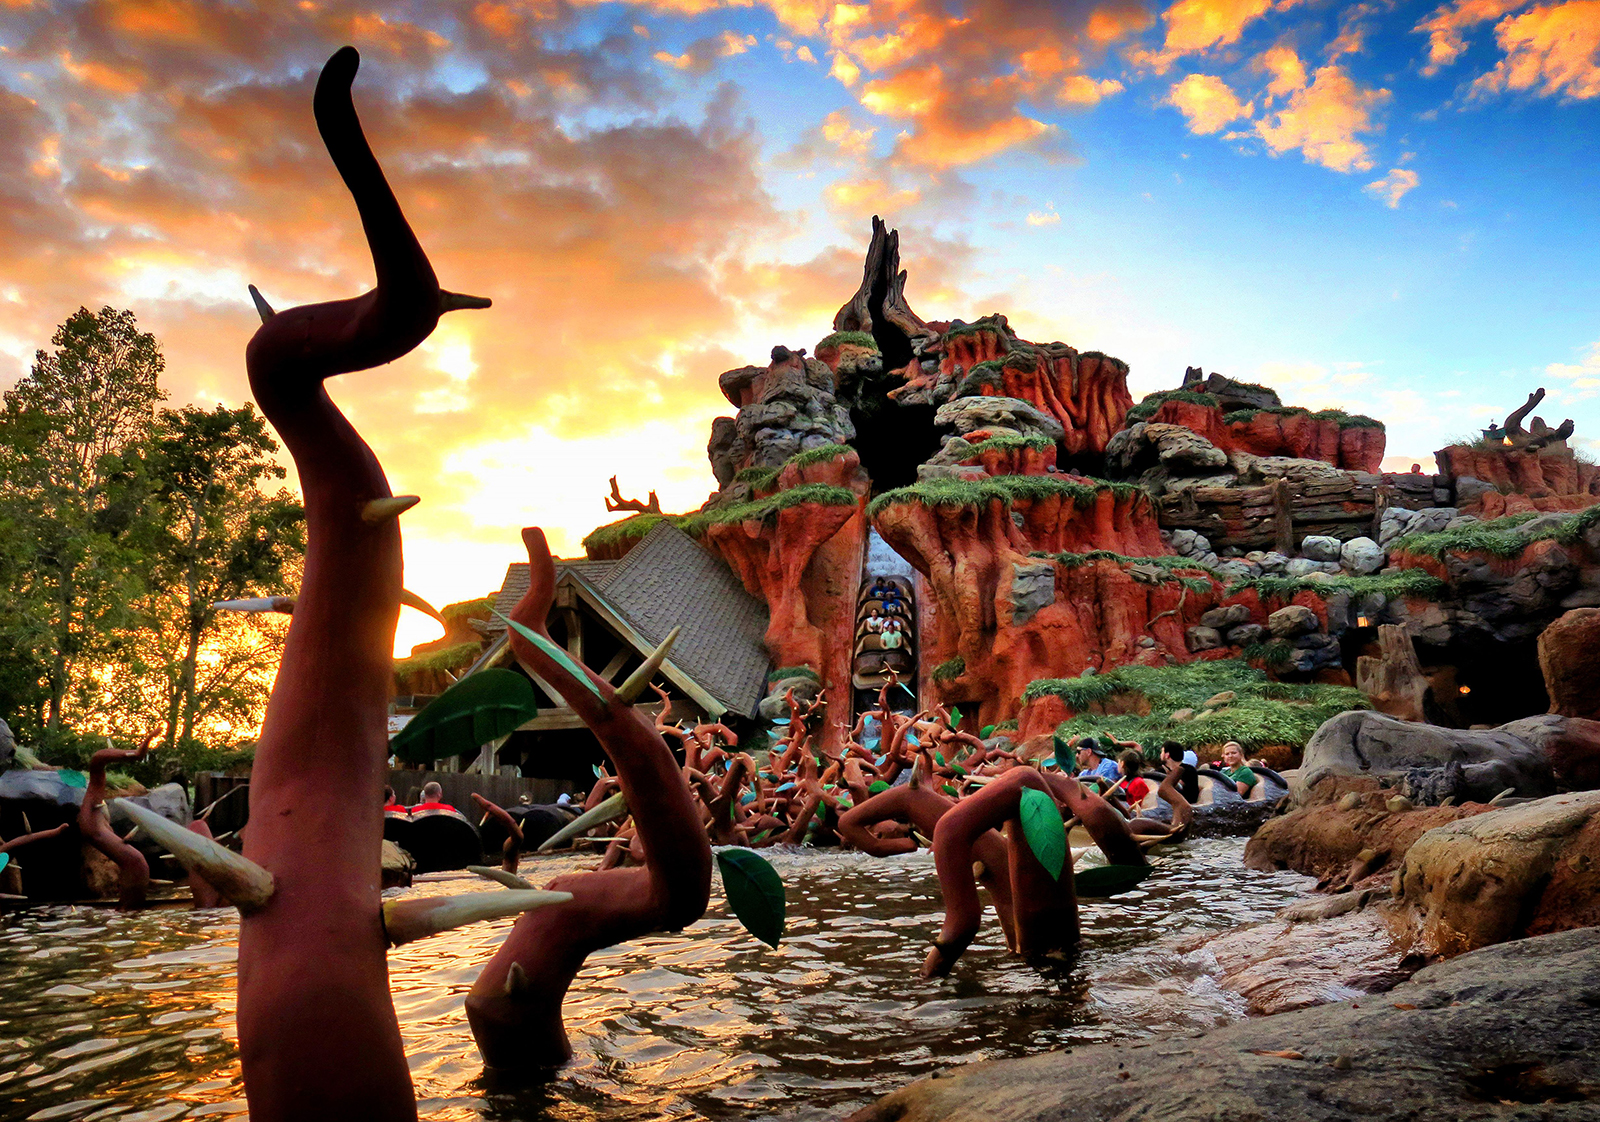 The sun sets on Splash Mountain in the Magic Kingdom at Walt Disney World, Thursday, Dec. 7, 2022. The popular attraction opened in 1992 and will close permanently on Jan. 23, 2023, to be repurposed with a new theme as âTiana's Bayou Adventure.â (Joe Burbank/Orlando Sentinel/Tribune News Service via Getty Images)